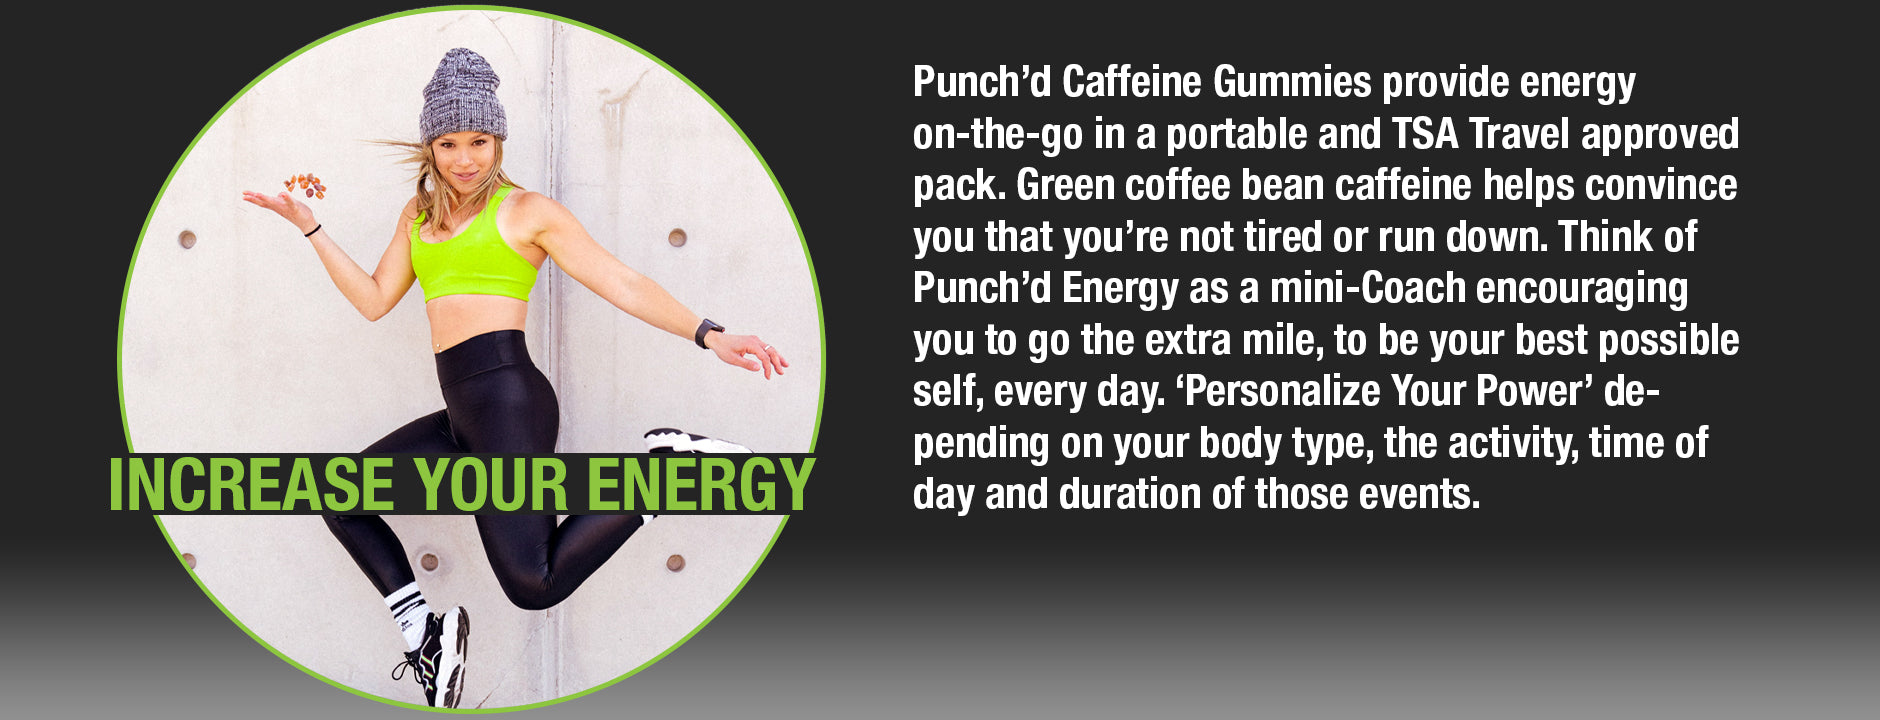 Punch'd Energy Increase Your Energy